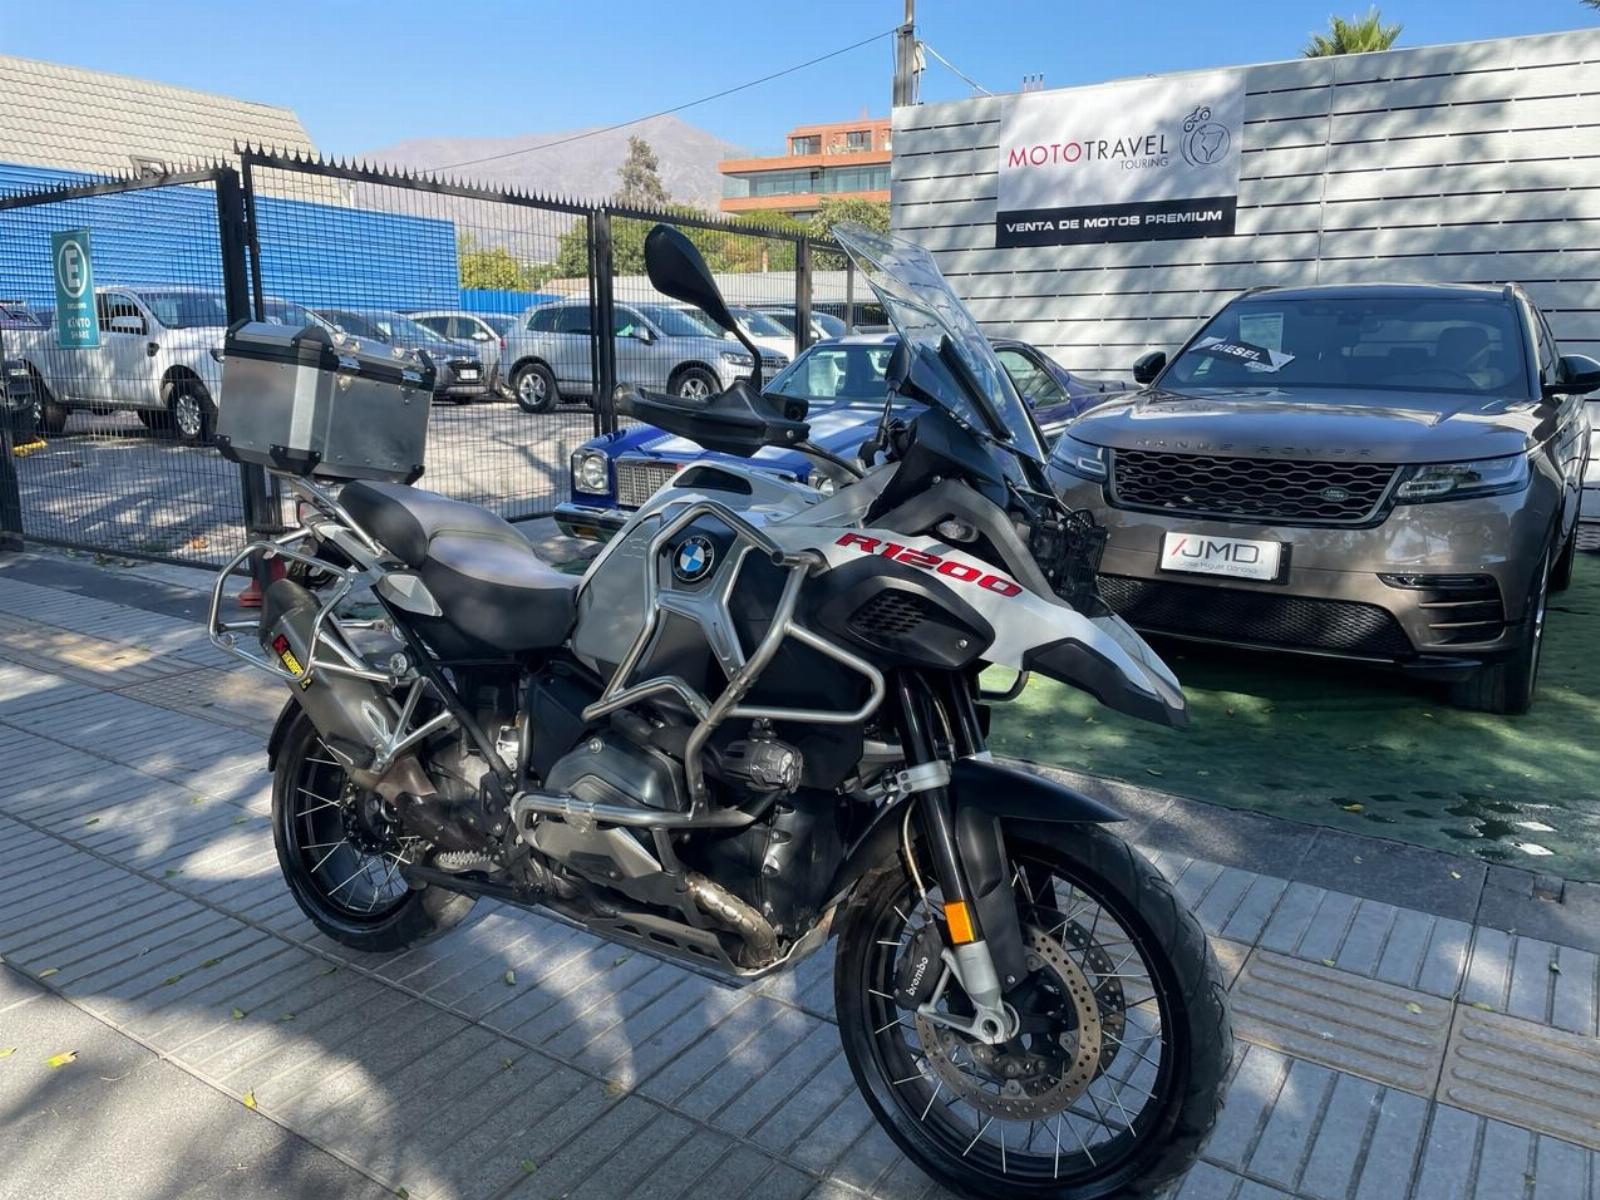 BMW R 1200 R1200 GS ADVENTURE 2018 IMPECABLE - FULL MOTOR